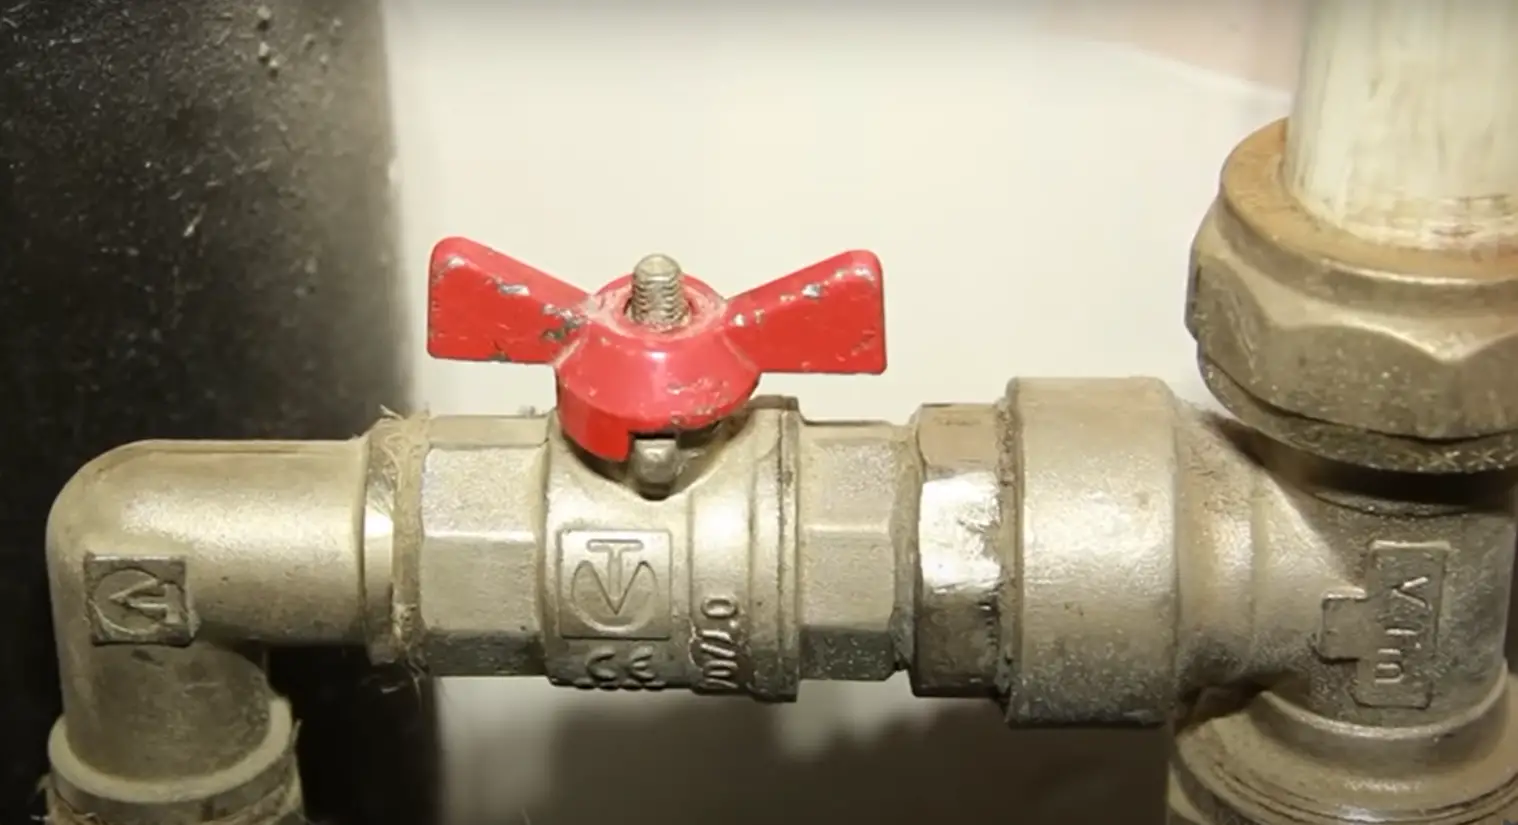 How To Remove Your Kitchen Faucet Without a Basin Wrench